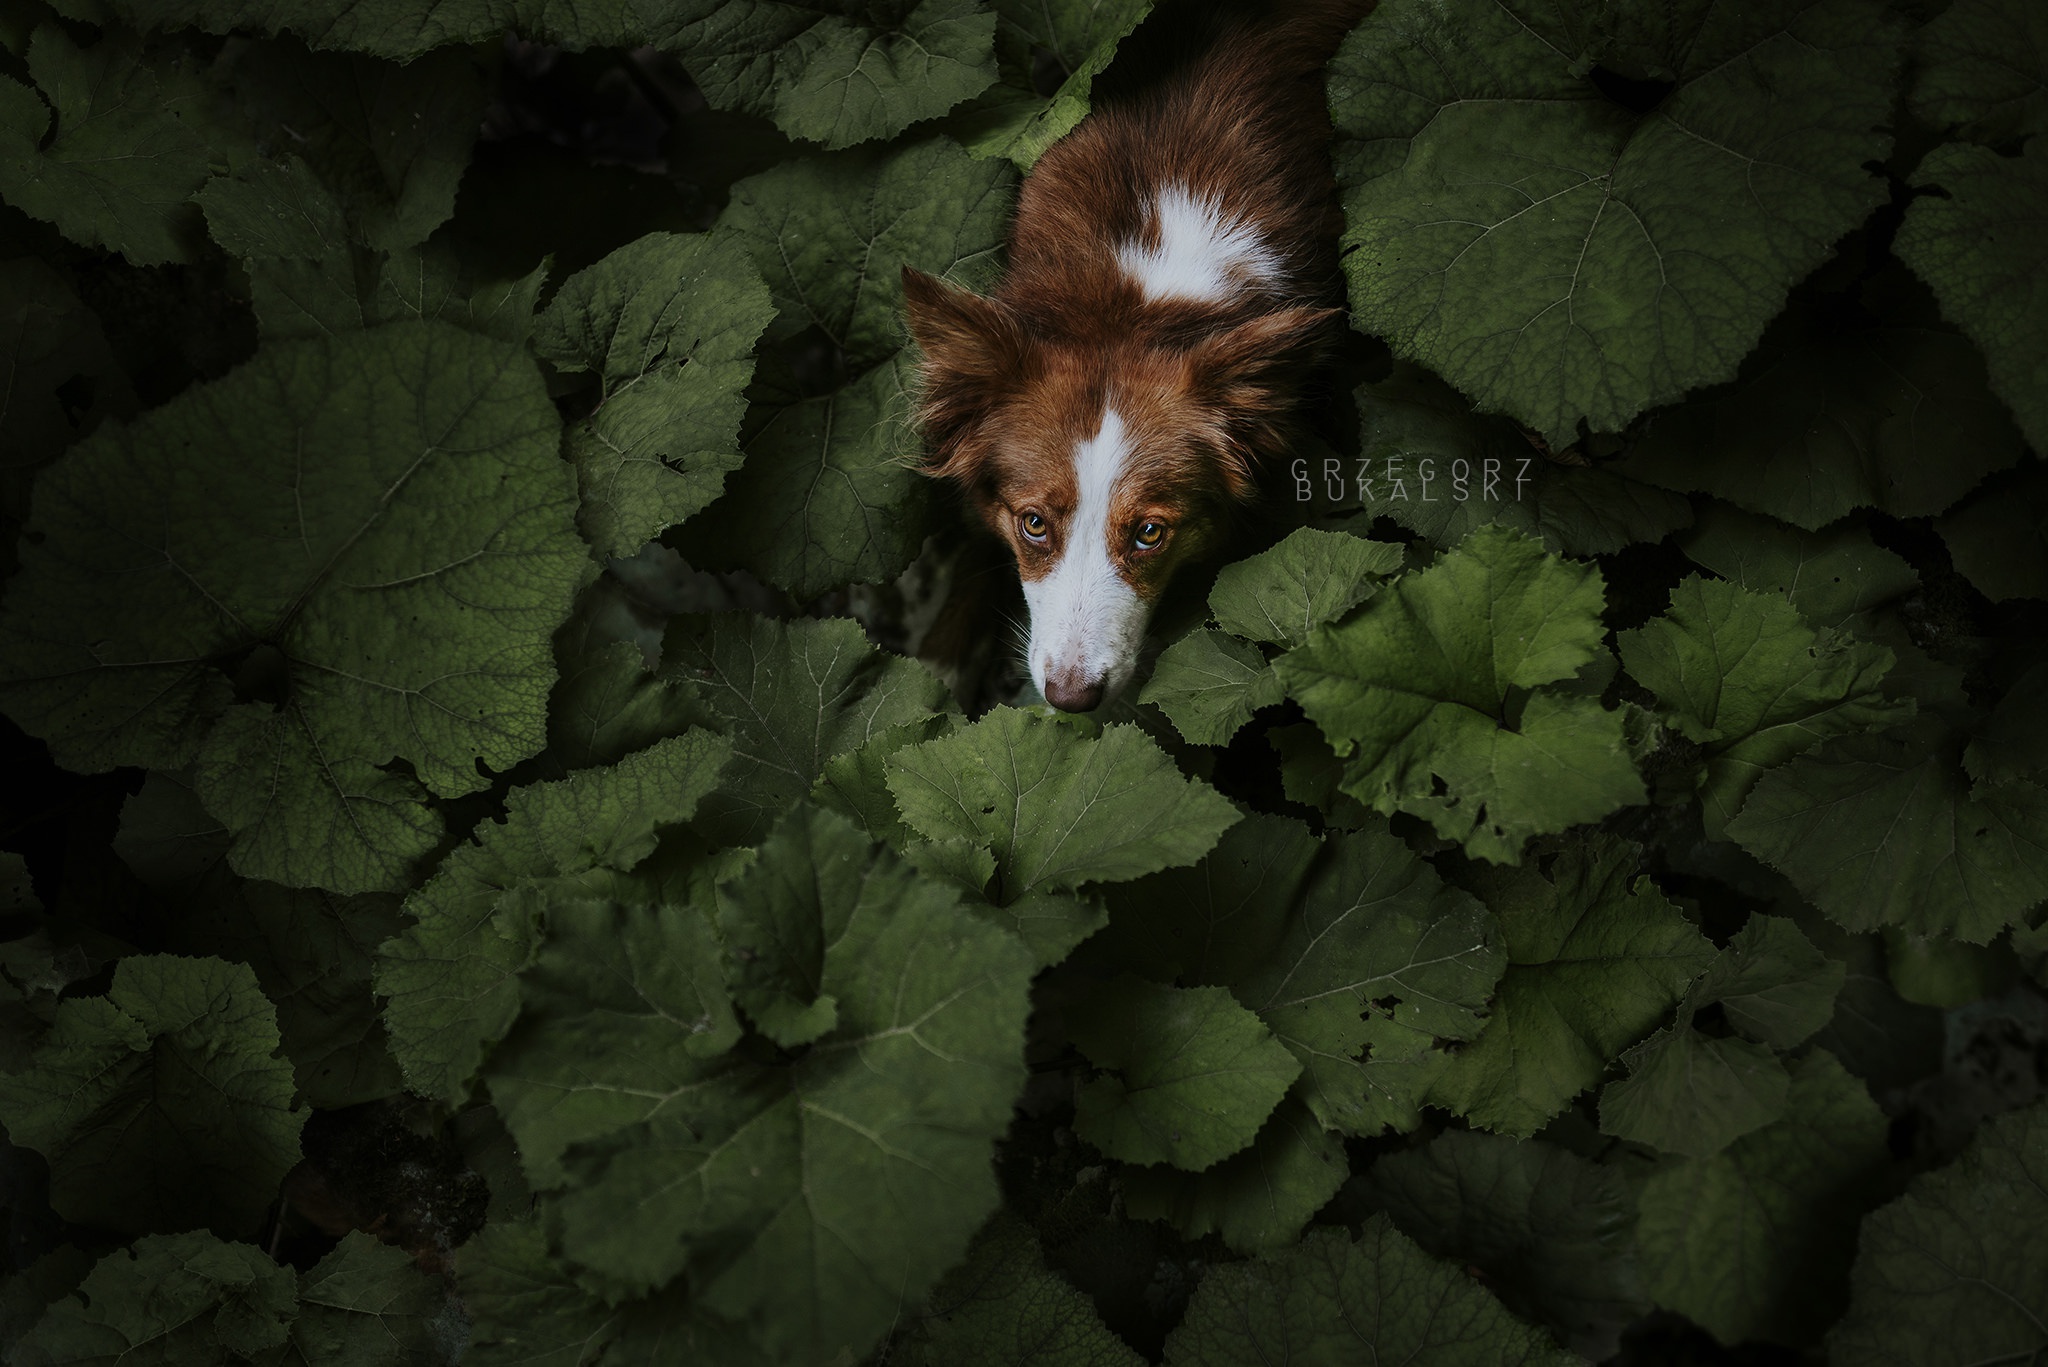 General 2048x1367 leaves plants animals dog closeup watermarked